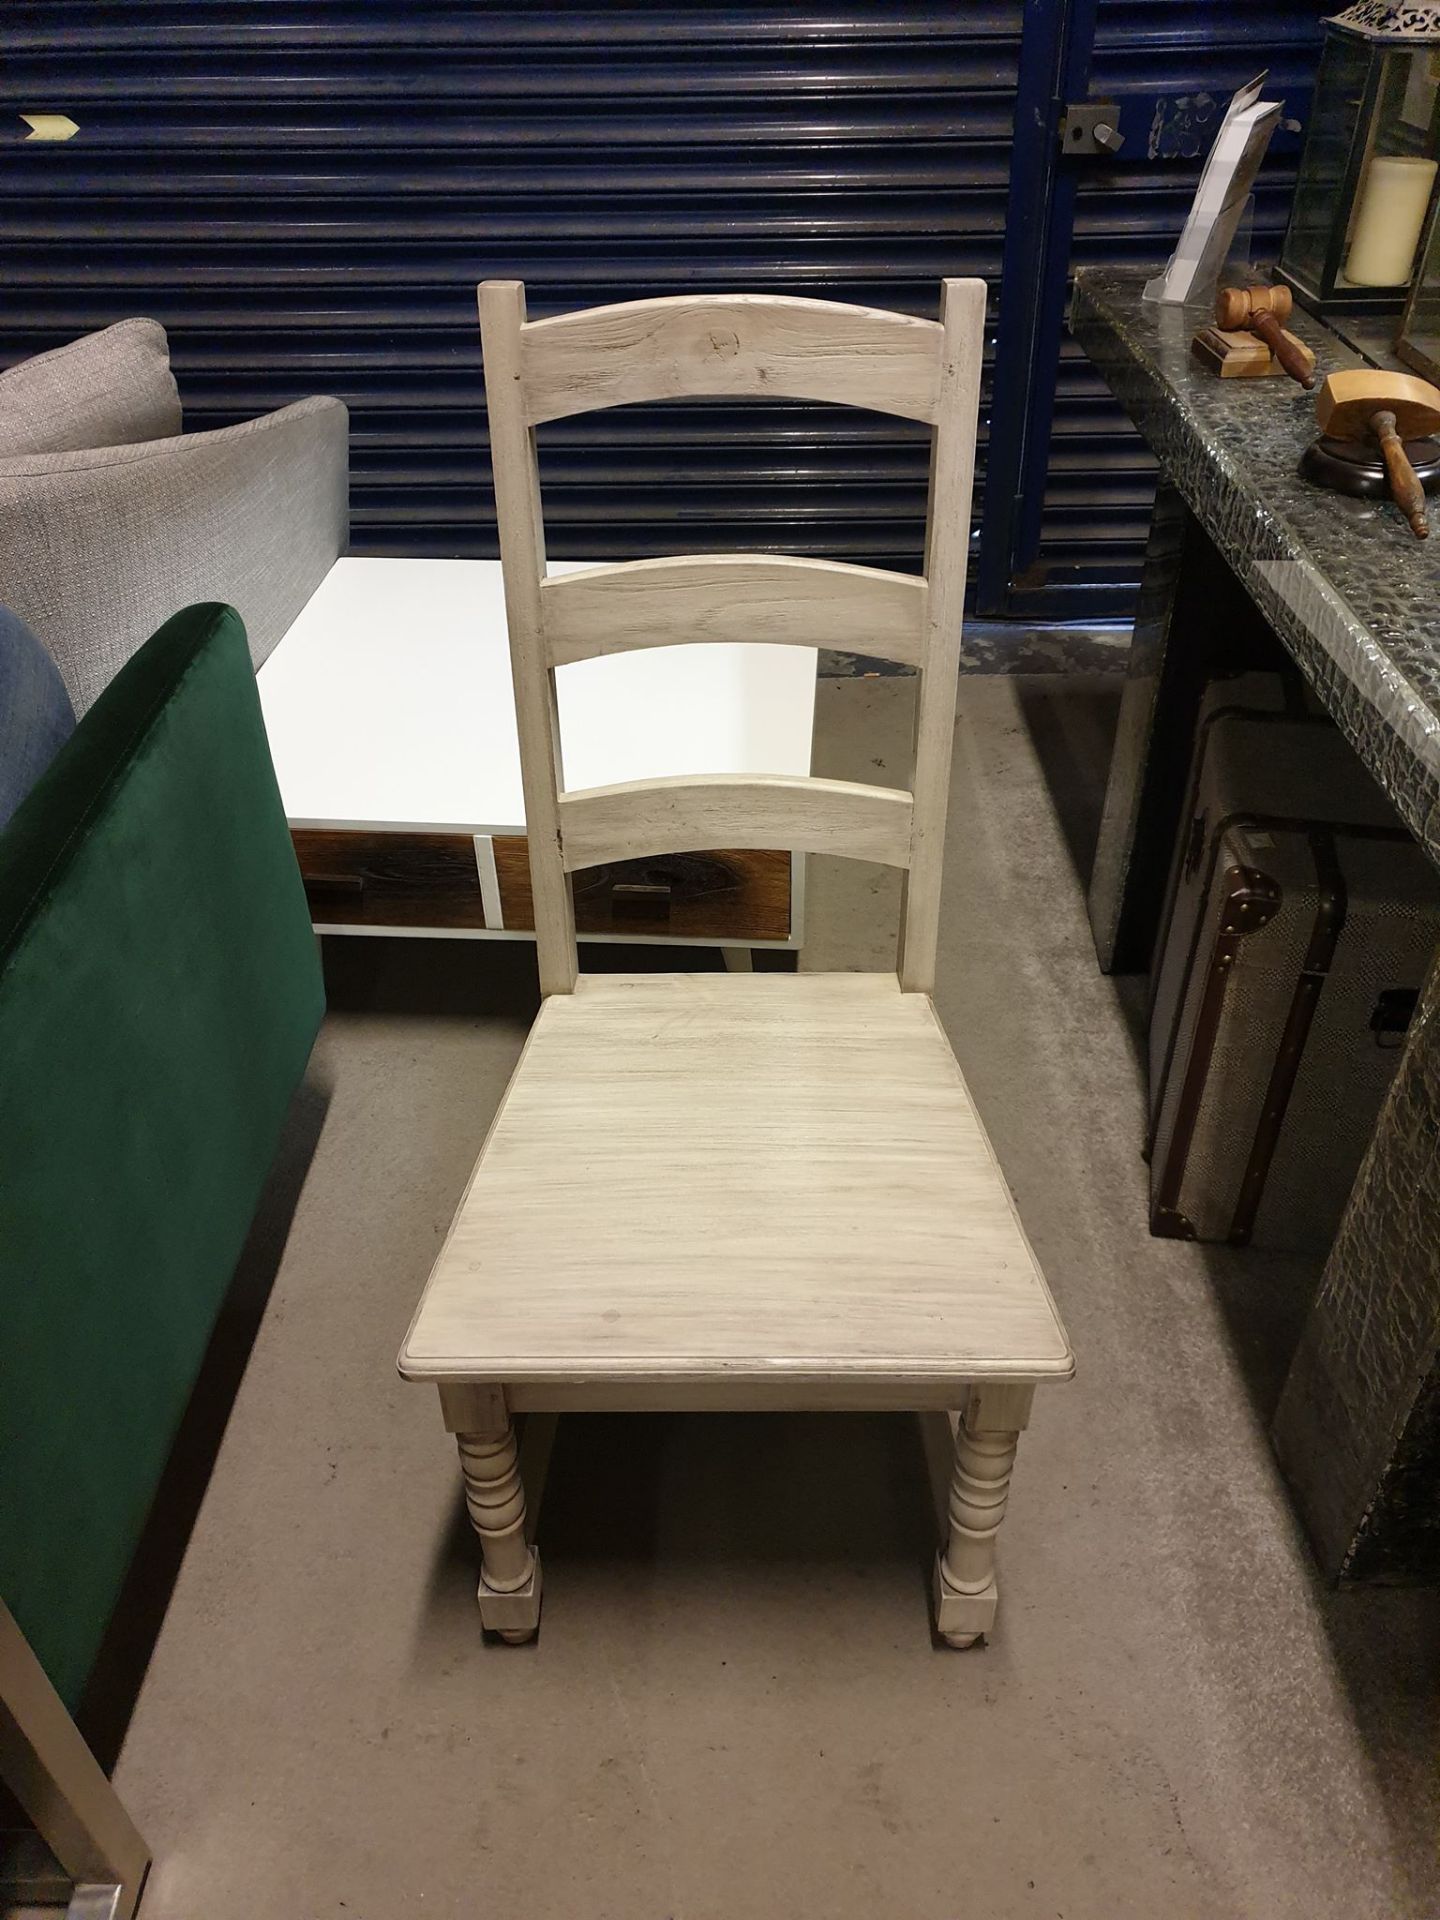 A Pair Of Solid Wood Rustic Pine Farmhouse Dining Chairs 57 X 55 X 108cm (Loc Cob273) - Image 2 of 7